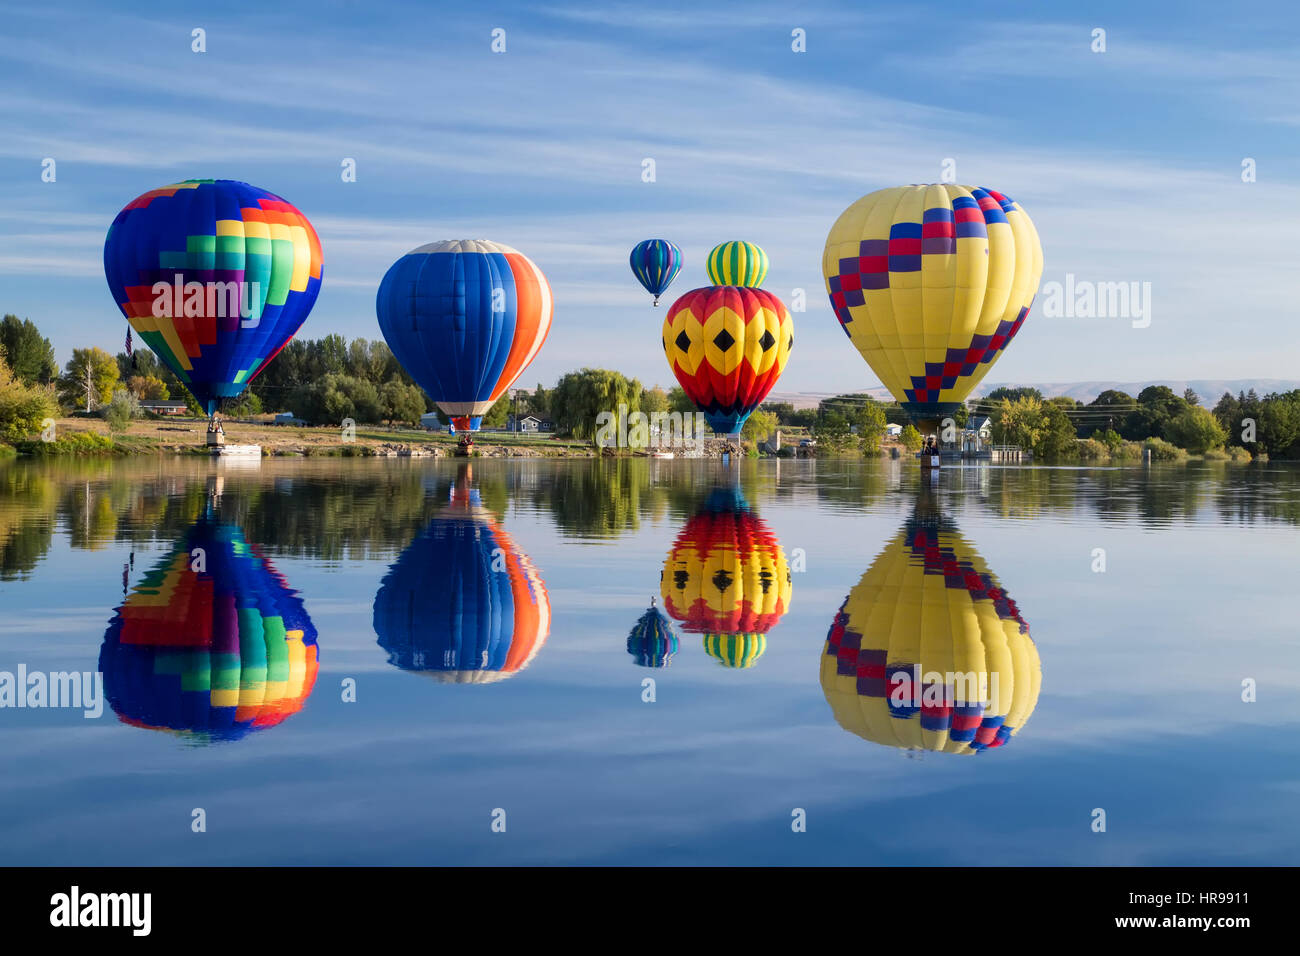 Hot Air Balloons touching down on the water with reflection Stock Photo